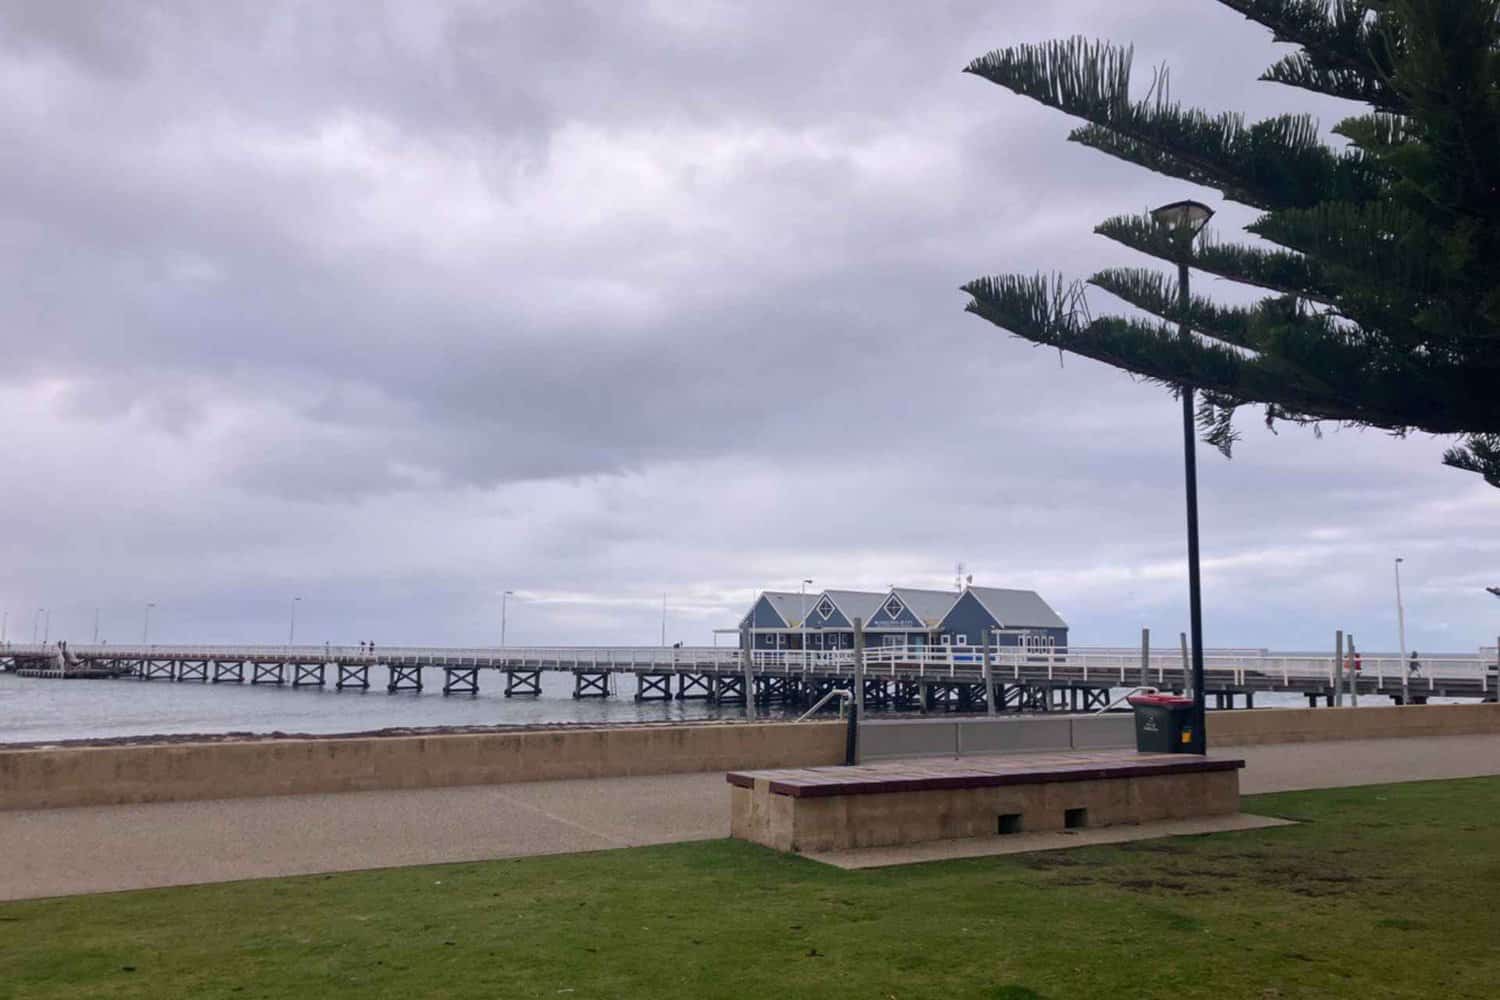 Gloomy weather over the iconic Busselton Jetty extending into the sea, with a lush park area in the foreground.